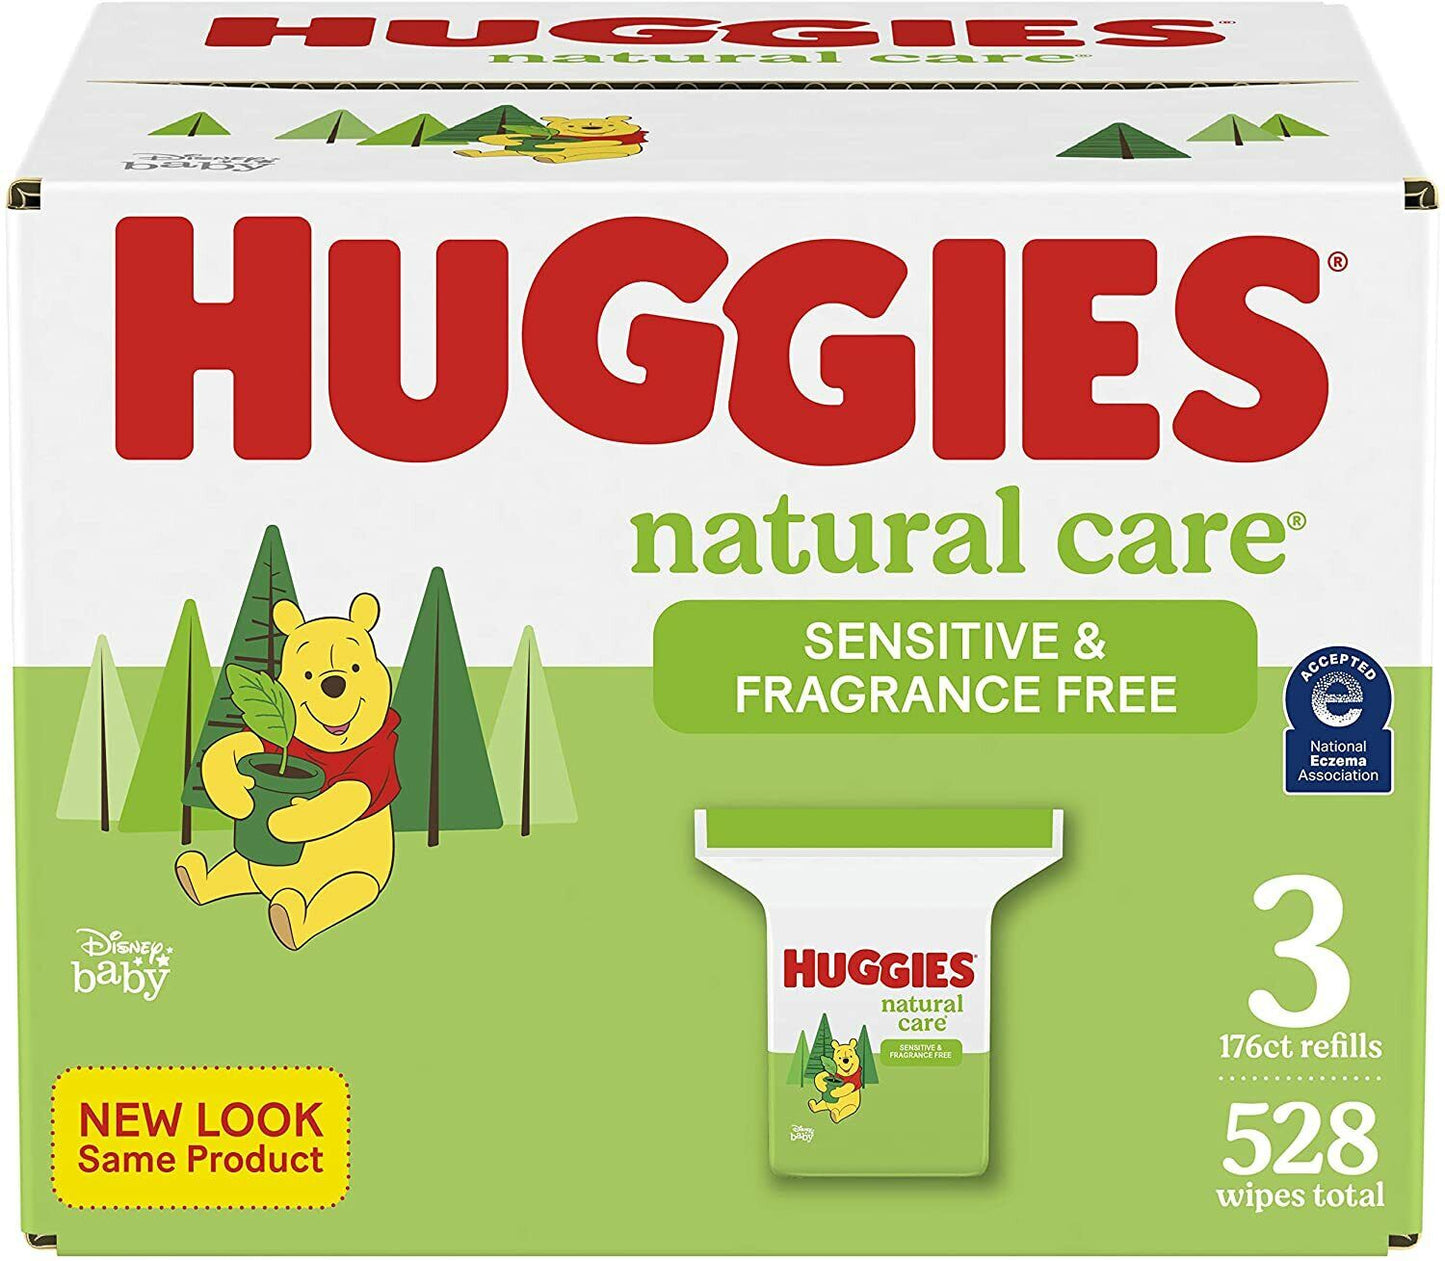 Huggies Natural Care Unscented Baby Wipes Fragrance Free 168, 288 528, 560 ct